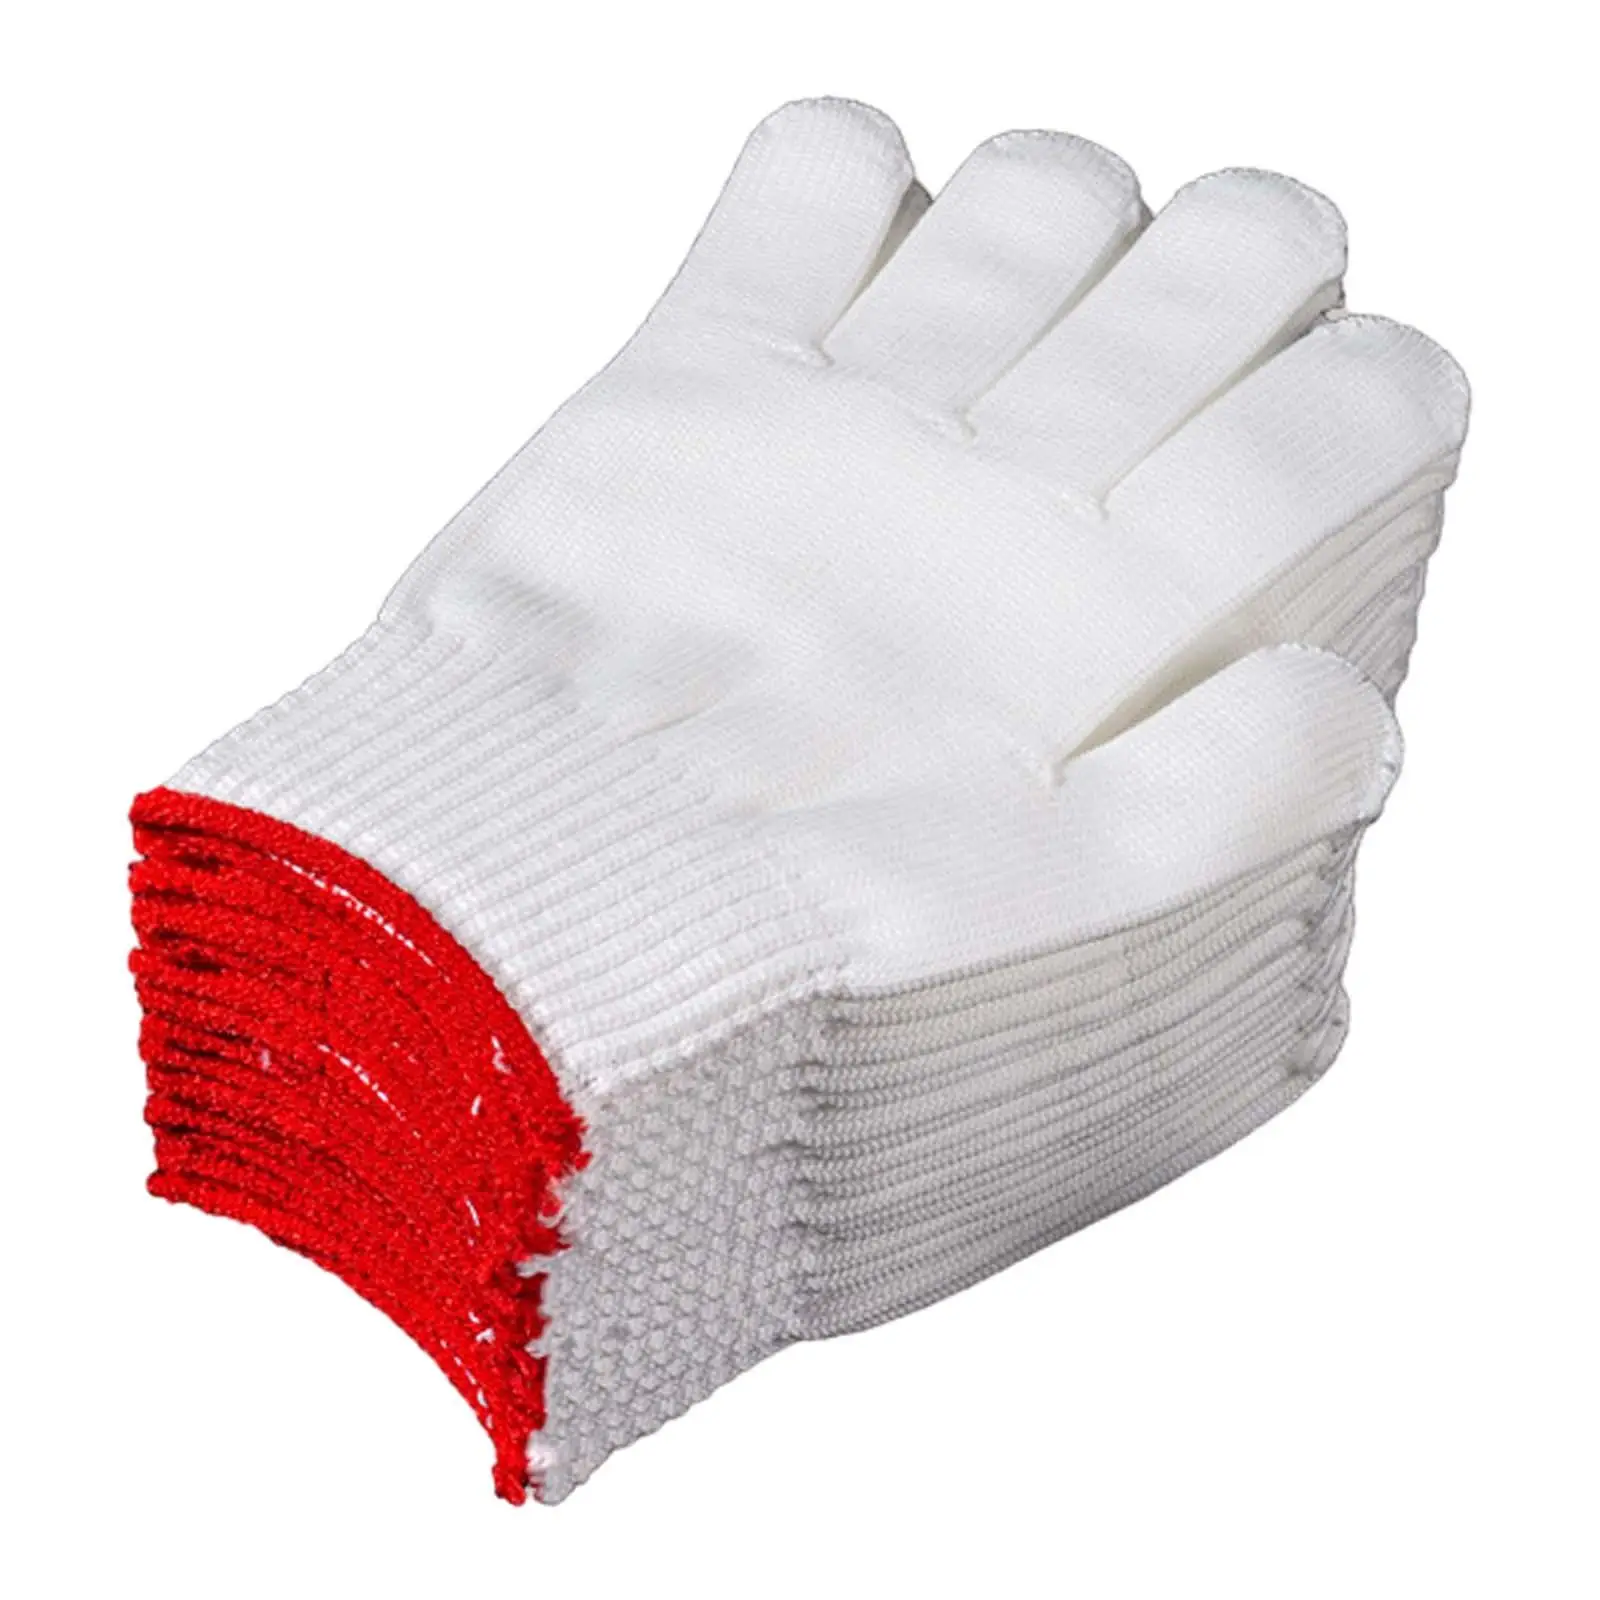 12 Pairs Work Gloves Cotton Labor Protection Gloves for Industrial Painting